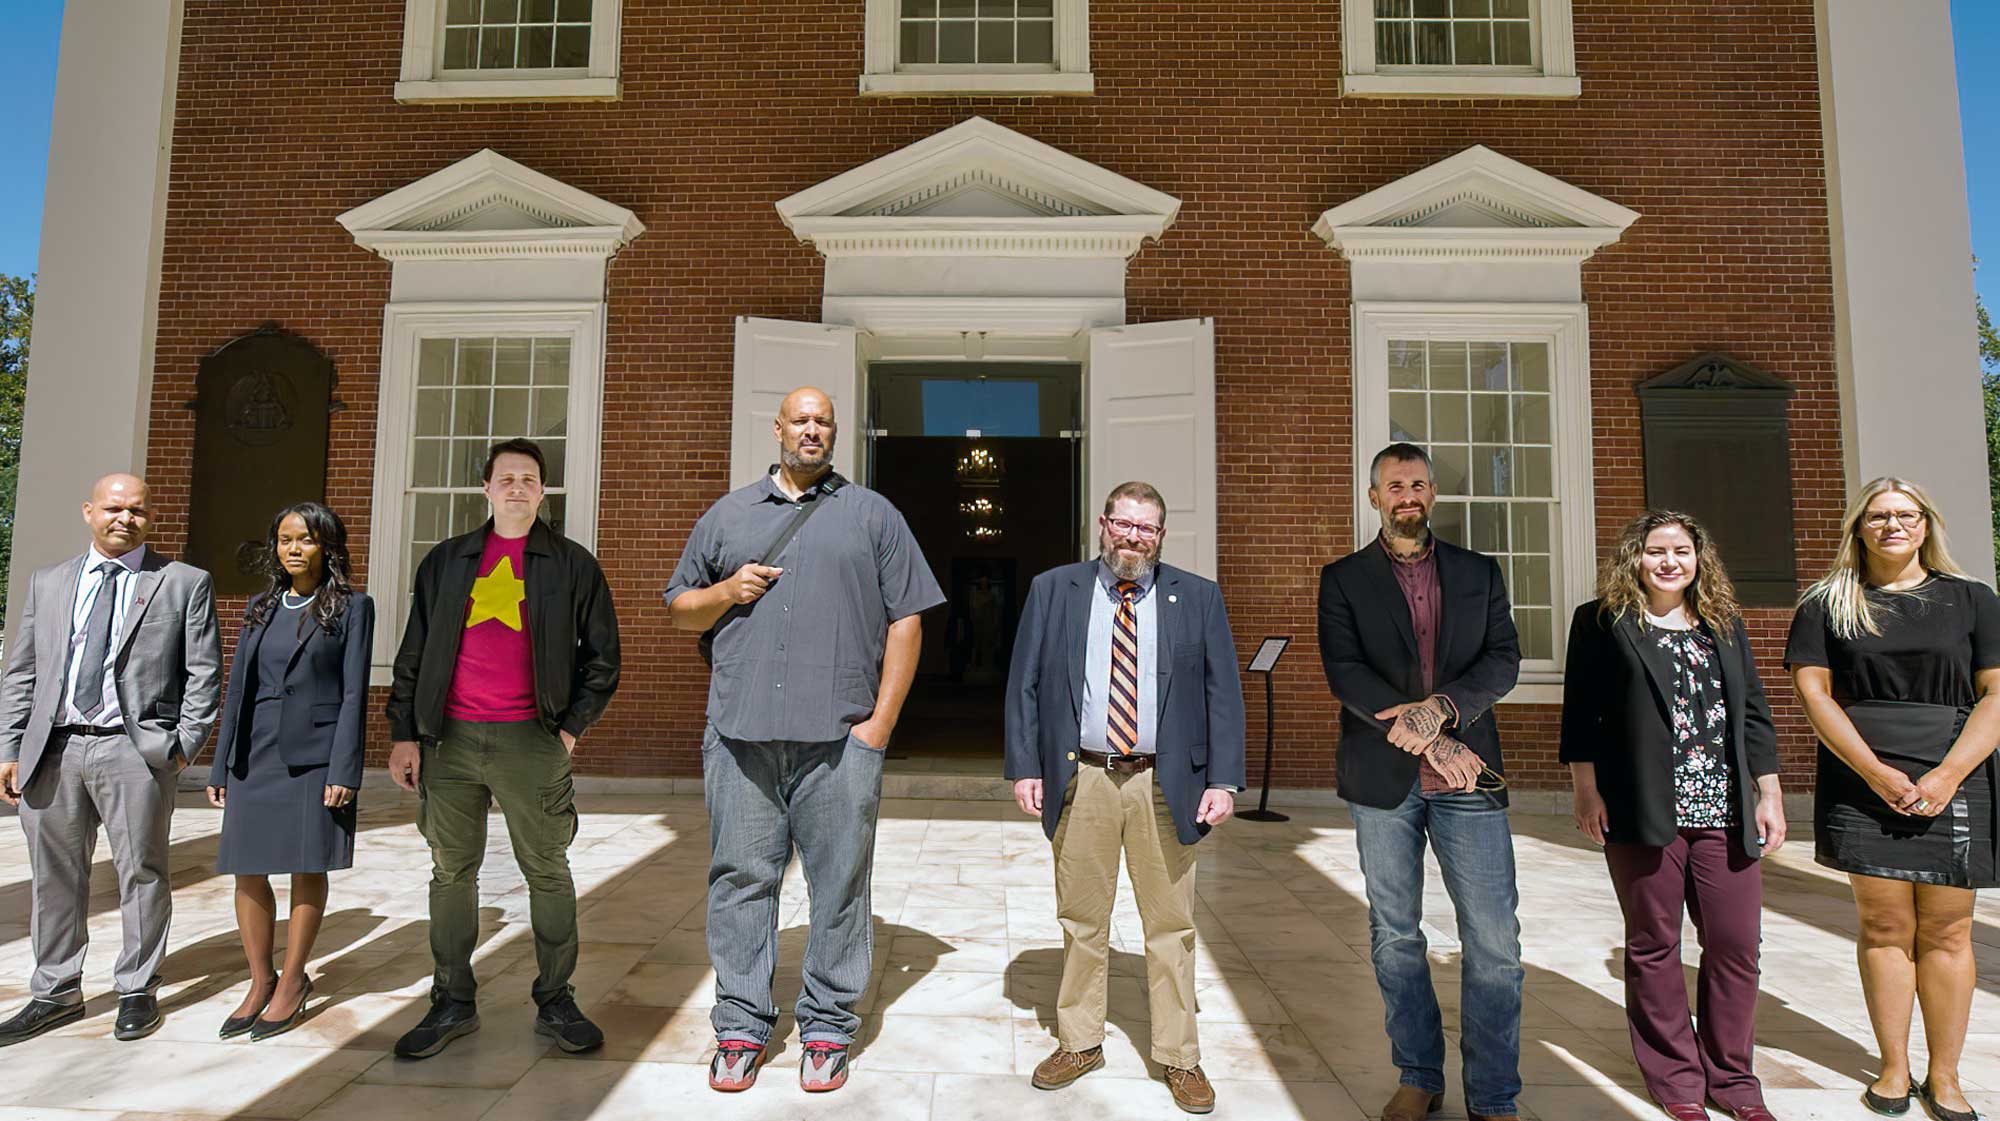 Police Officers who served on Jan. 6 visiting UVA